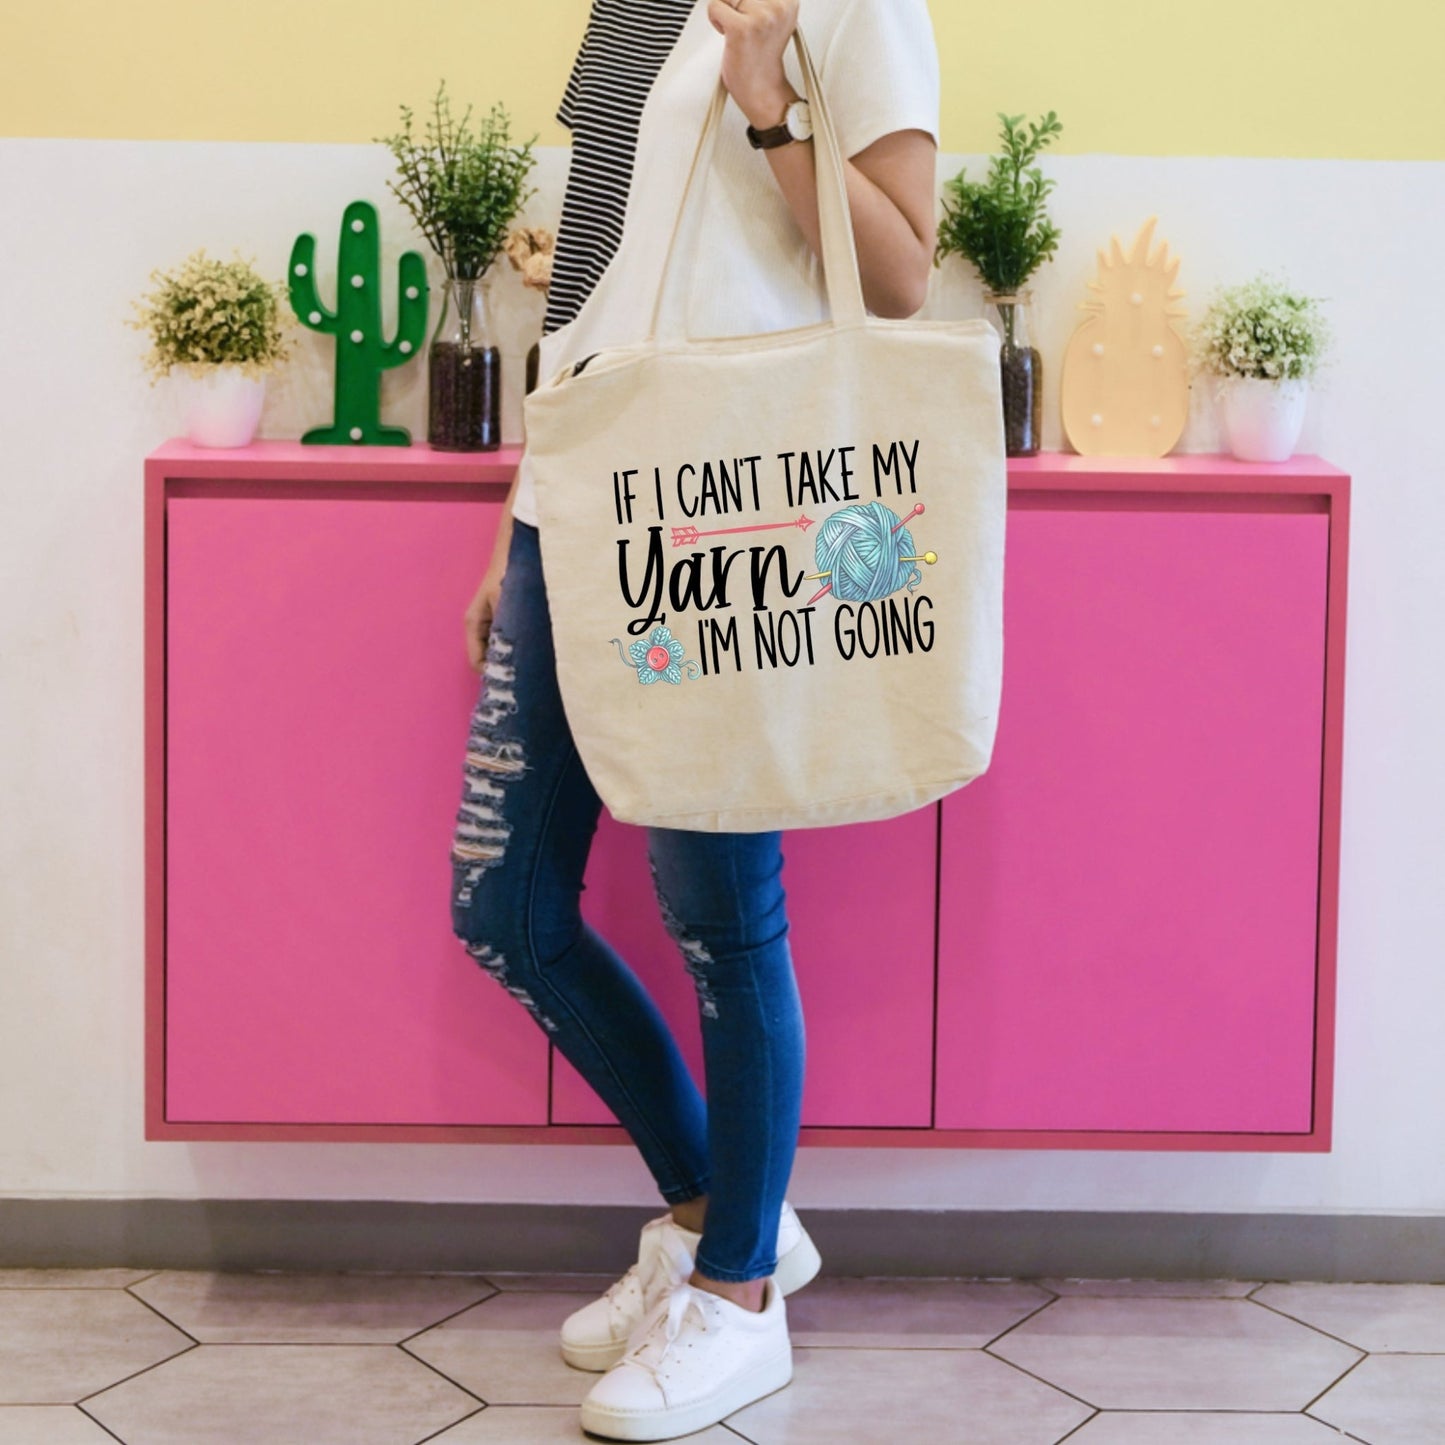 If I Can't Take My Yarn, I'm Not Going. Funny, personalized tote bag - Jammin Threads